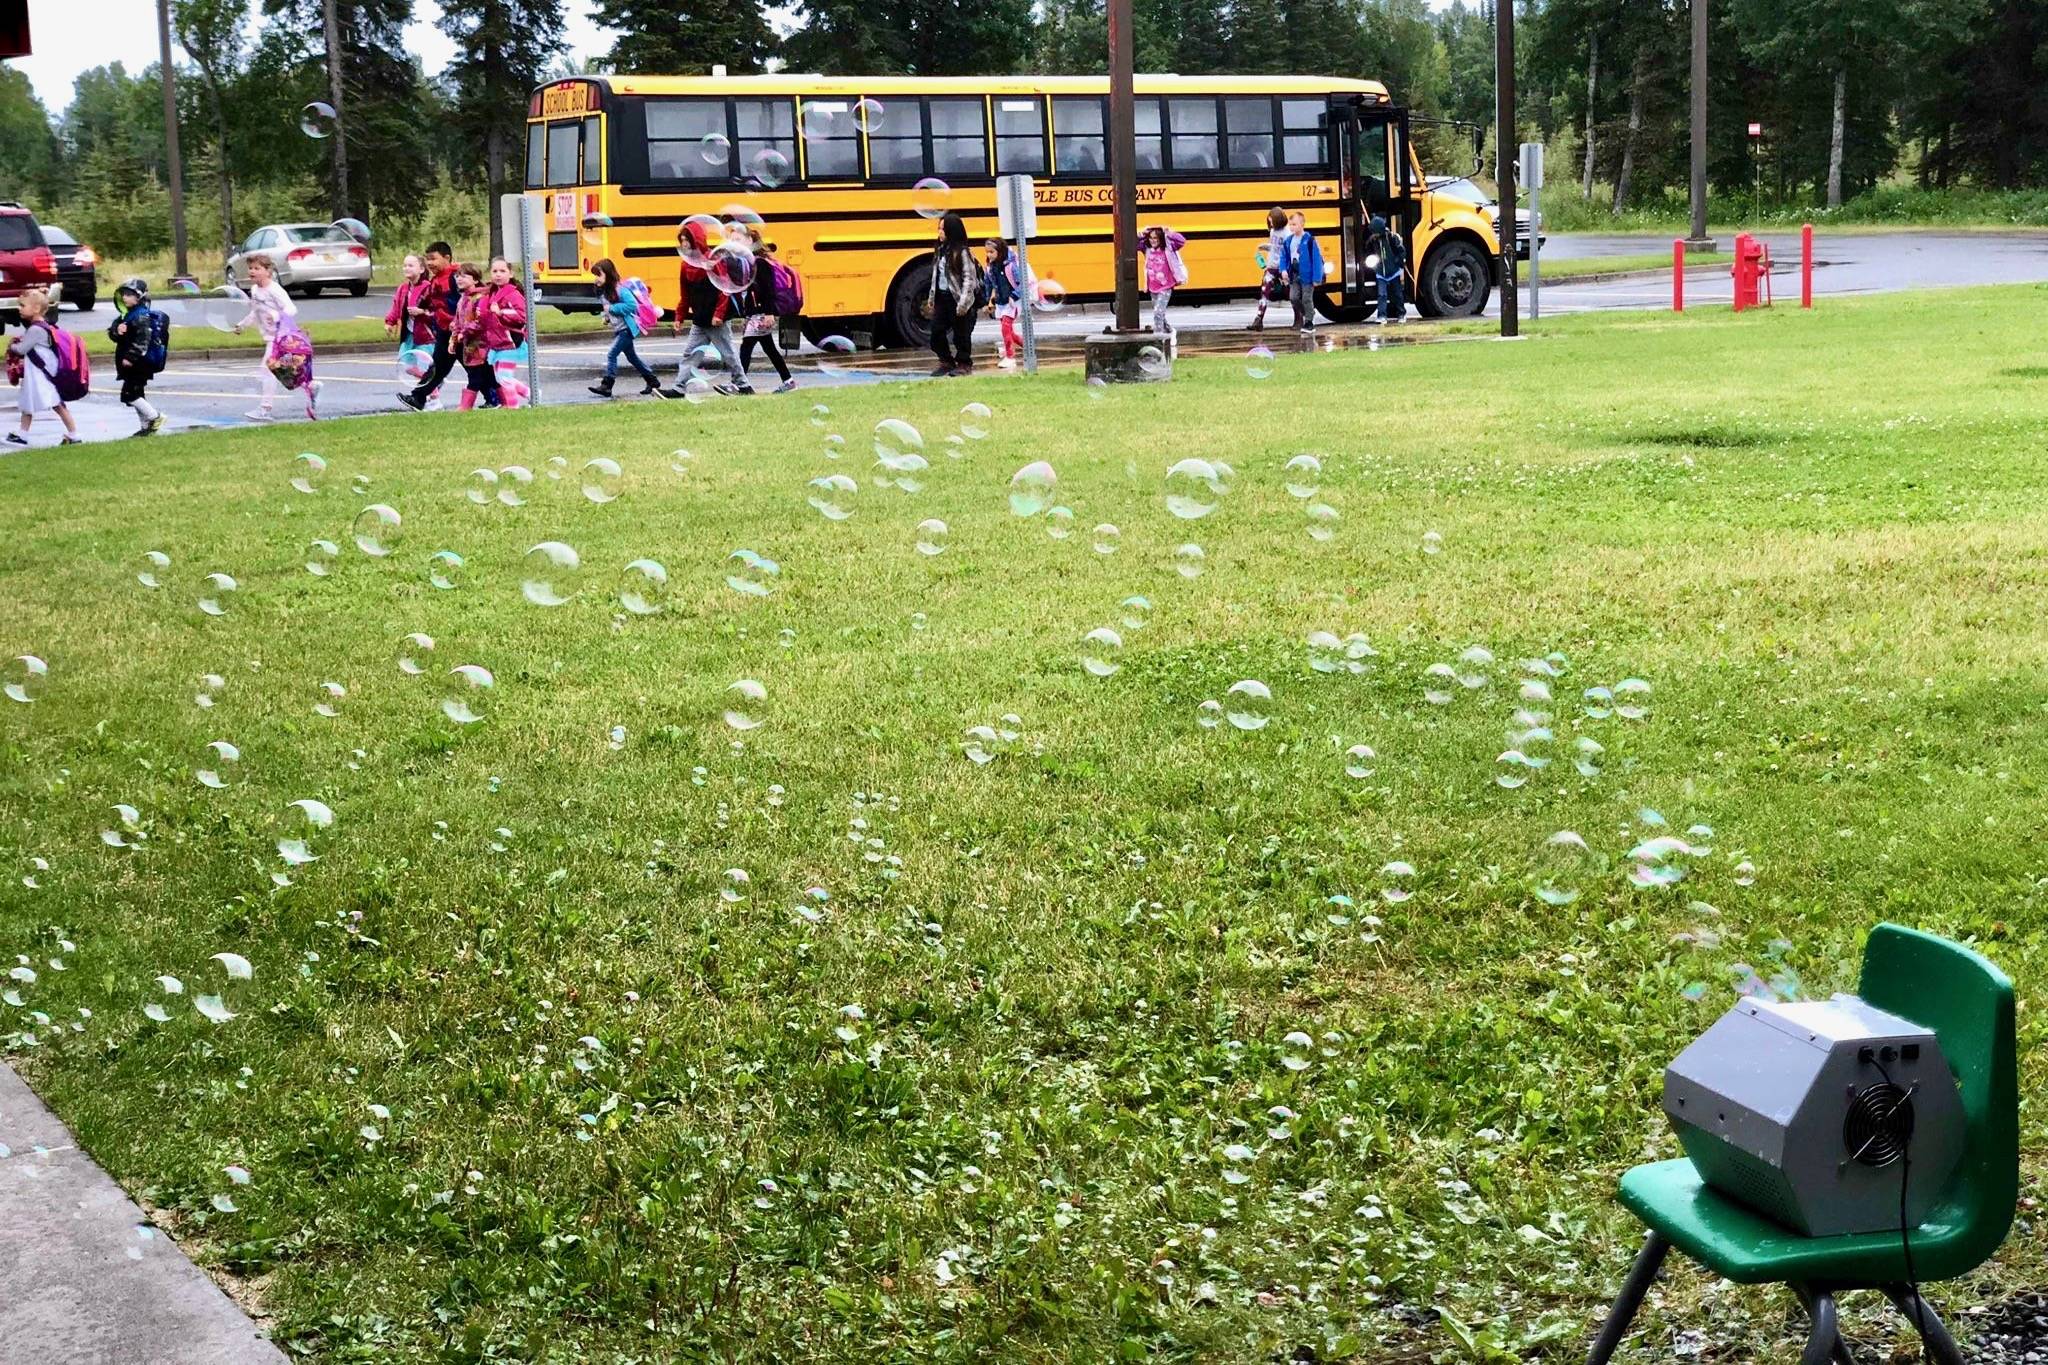 Students file out of busses on the first day of school on Tuesday, Aug. 21, at Mountain View Elementary in Kenai. The children were welcomed by bubble machines, jazz music and Principal Kircher. (Photo by Victoria Petersen/Peninsula Clarion)